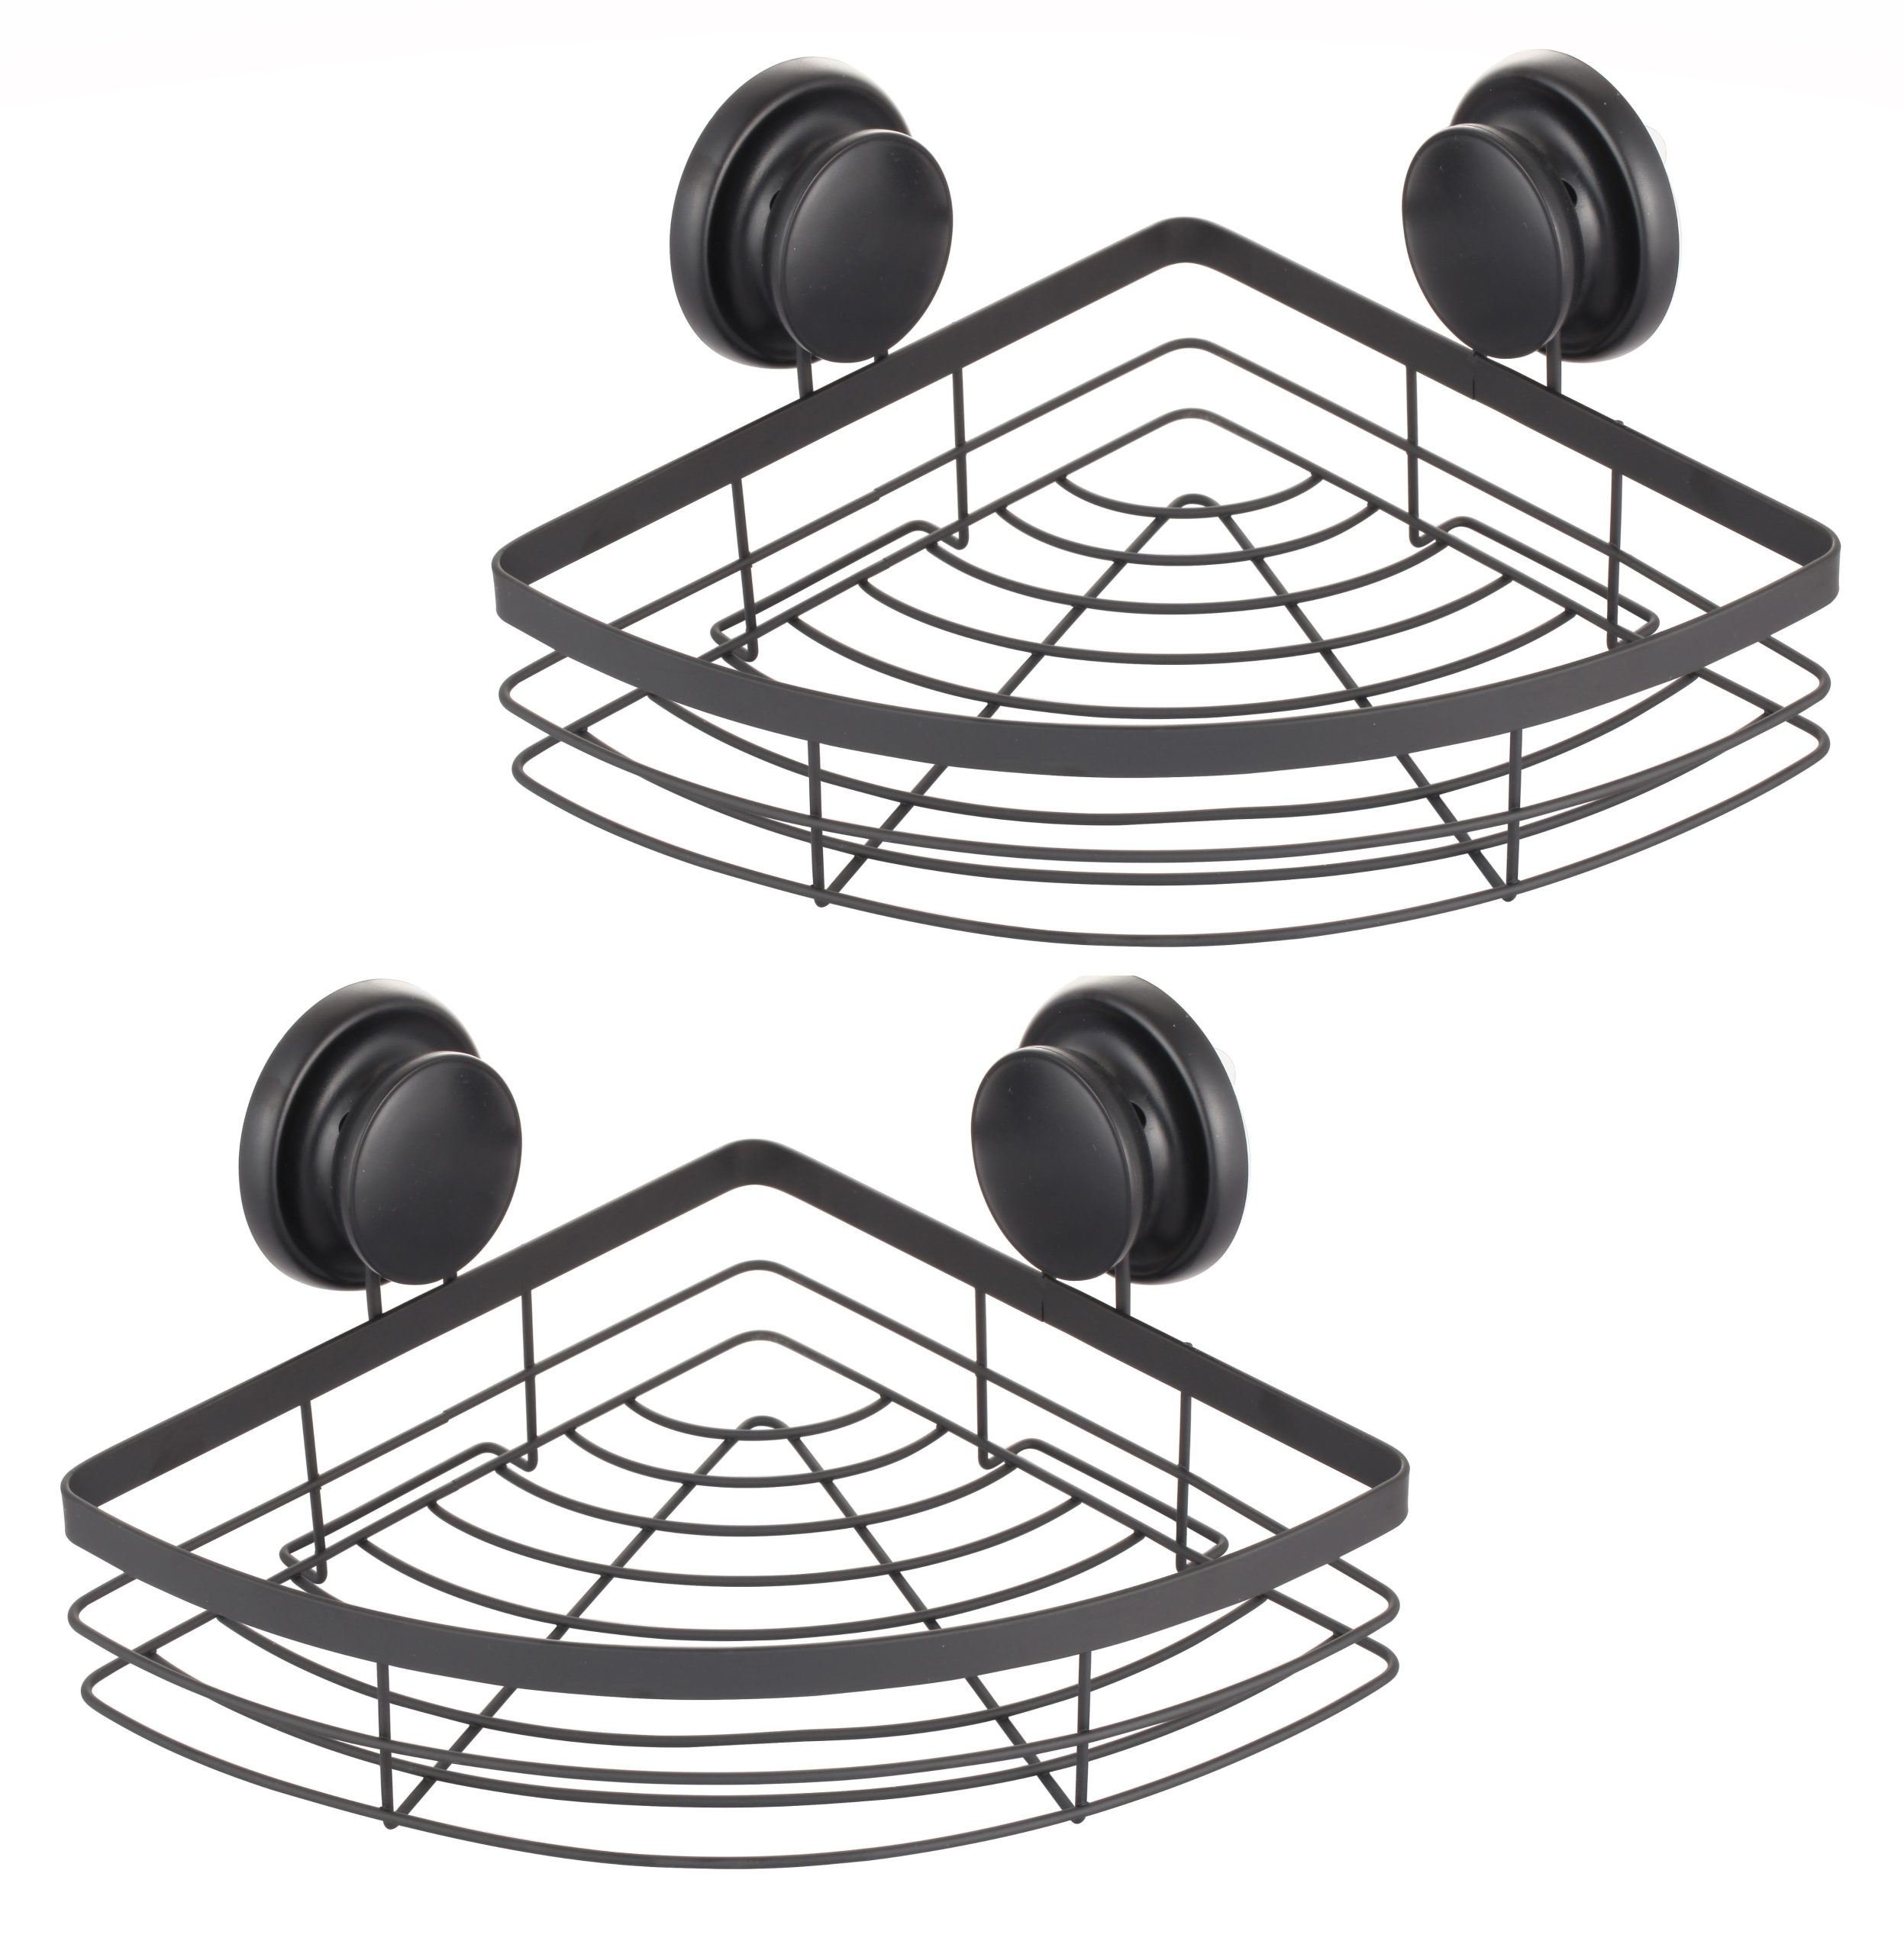 2 Pack Corner Shower Caddy Shelf Basket Rack with Premium Vacuum Suction Cup No-Drilling for Bathroom and Kitchen